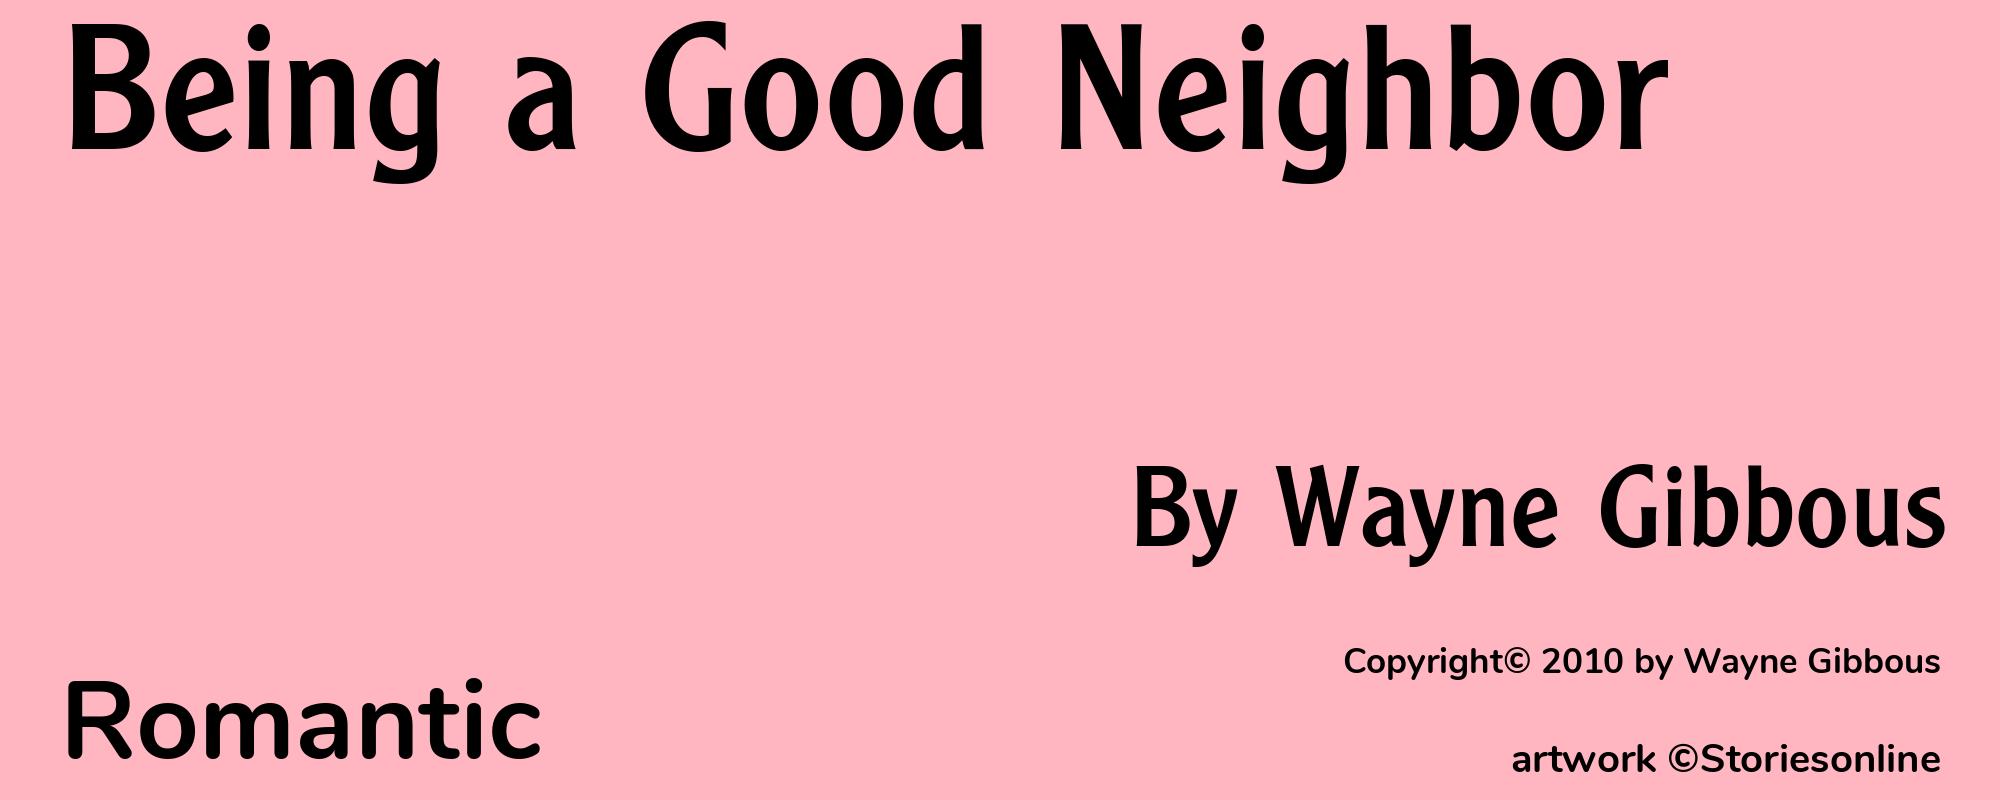 Being a Good Neighbor - Cover